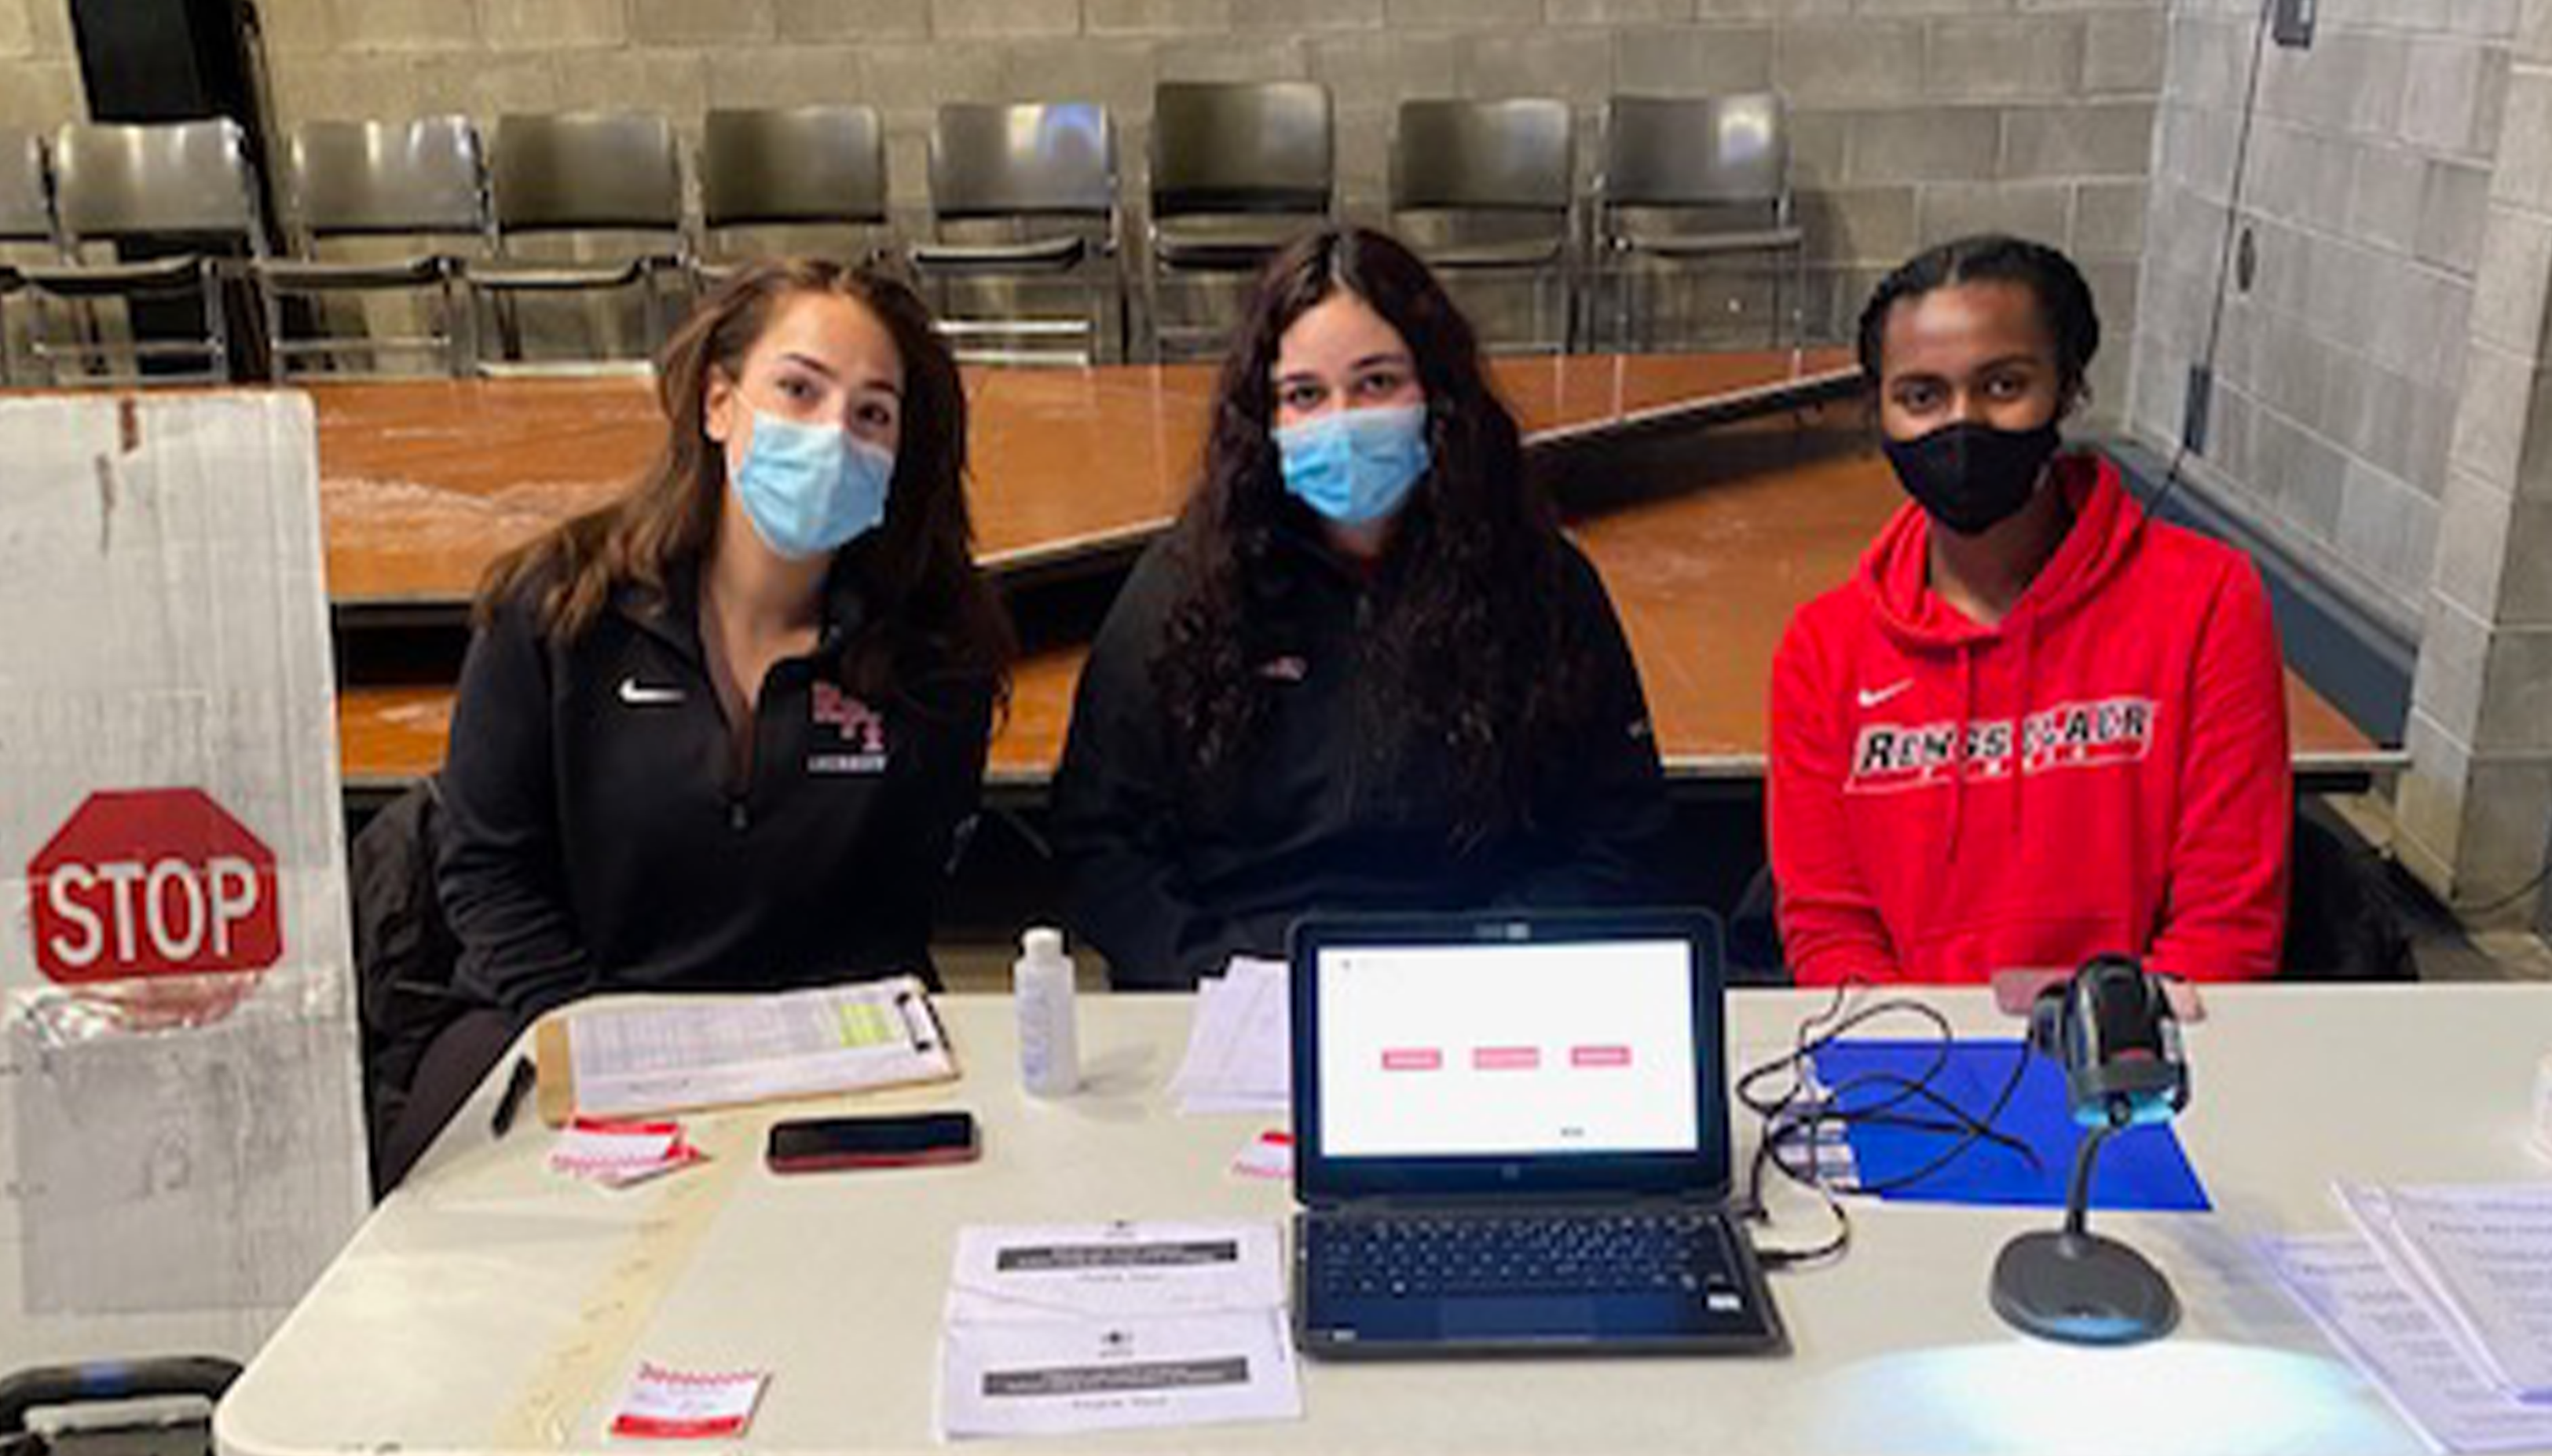 Student-athletes at blood drive check-in table